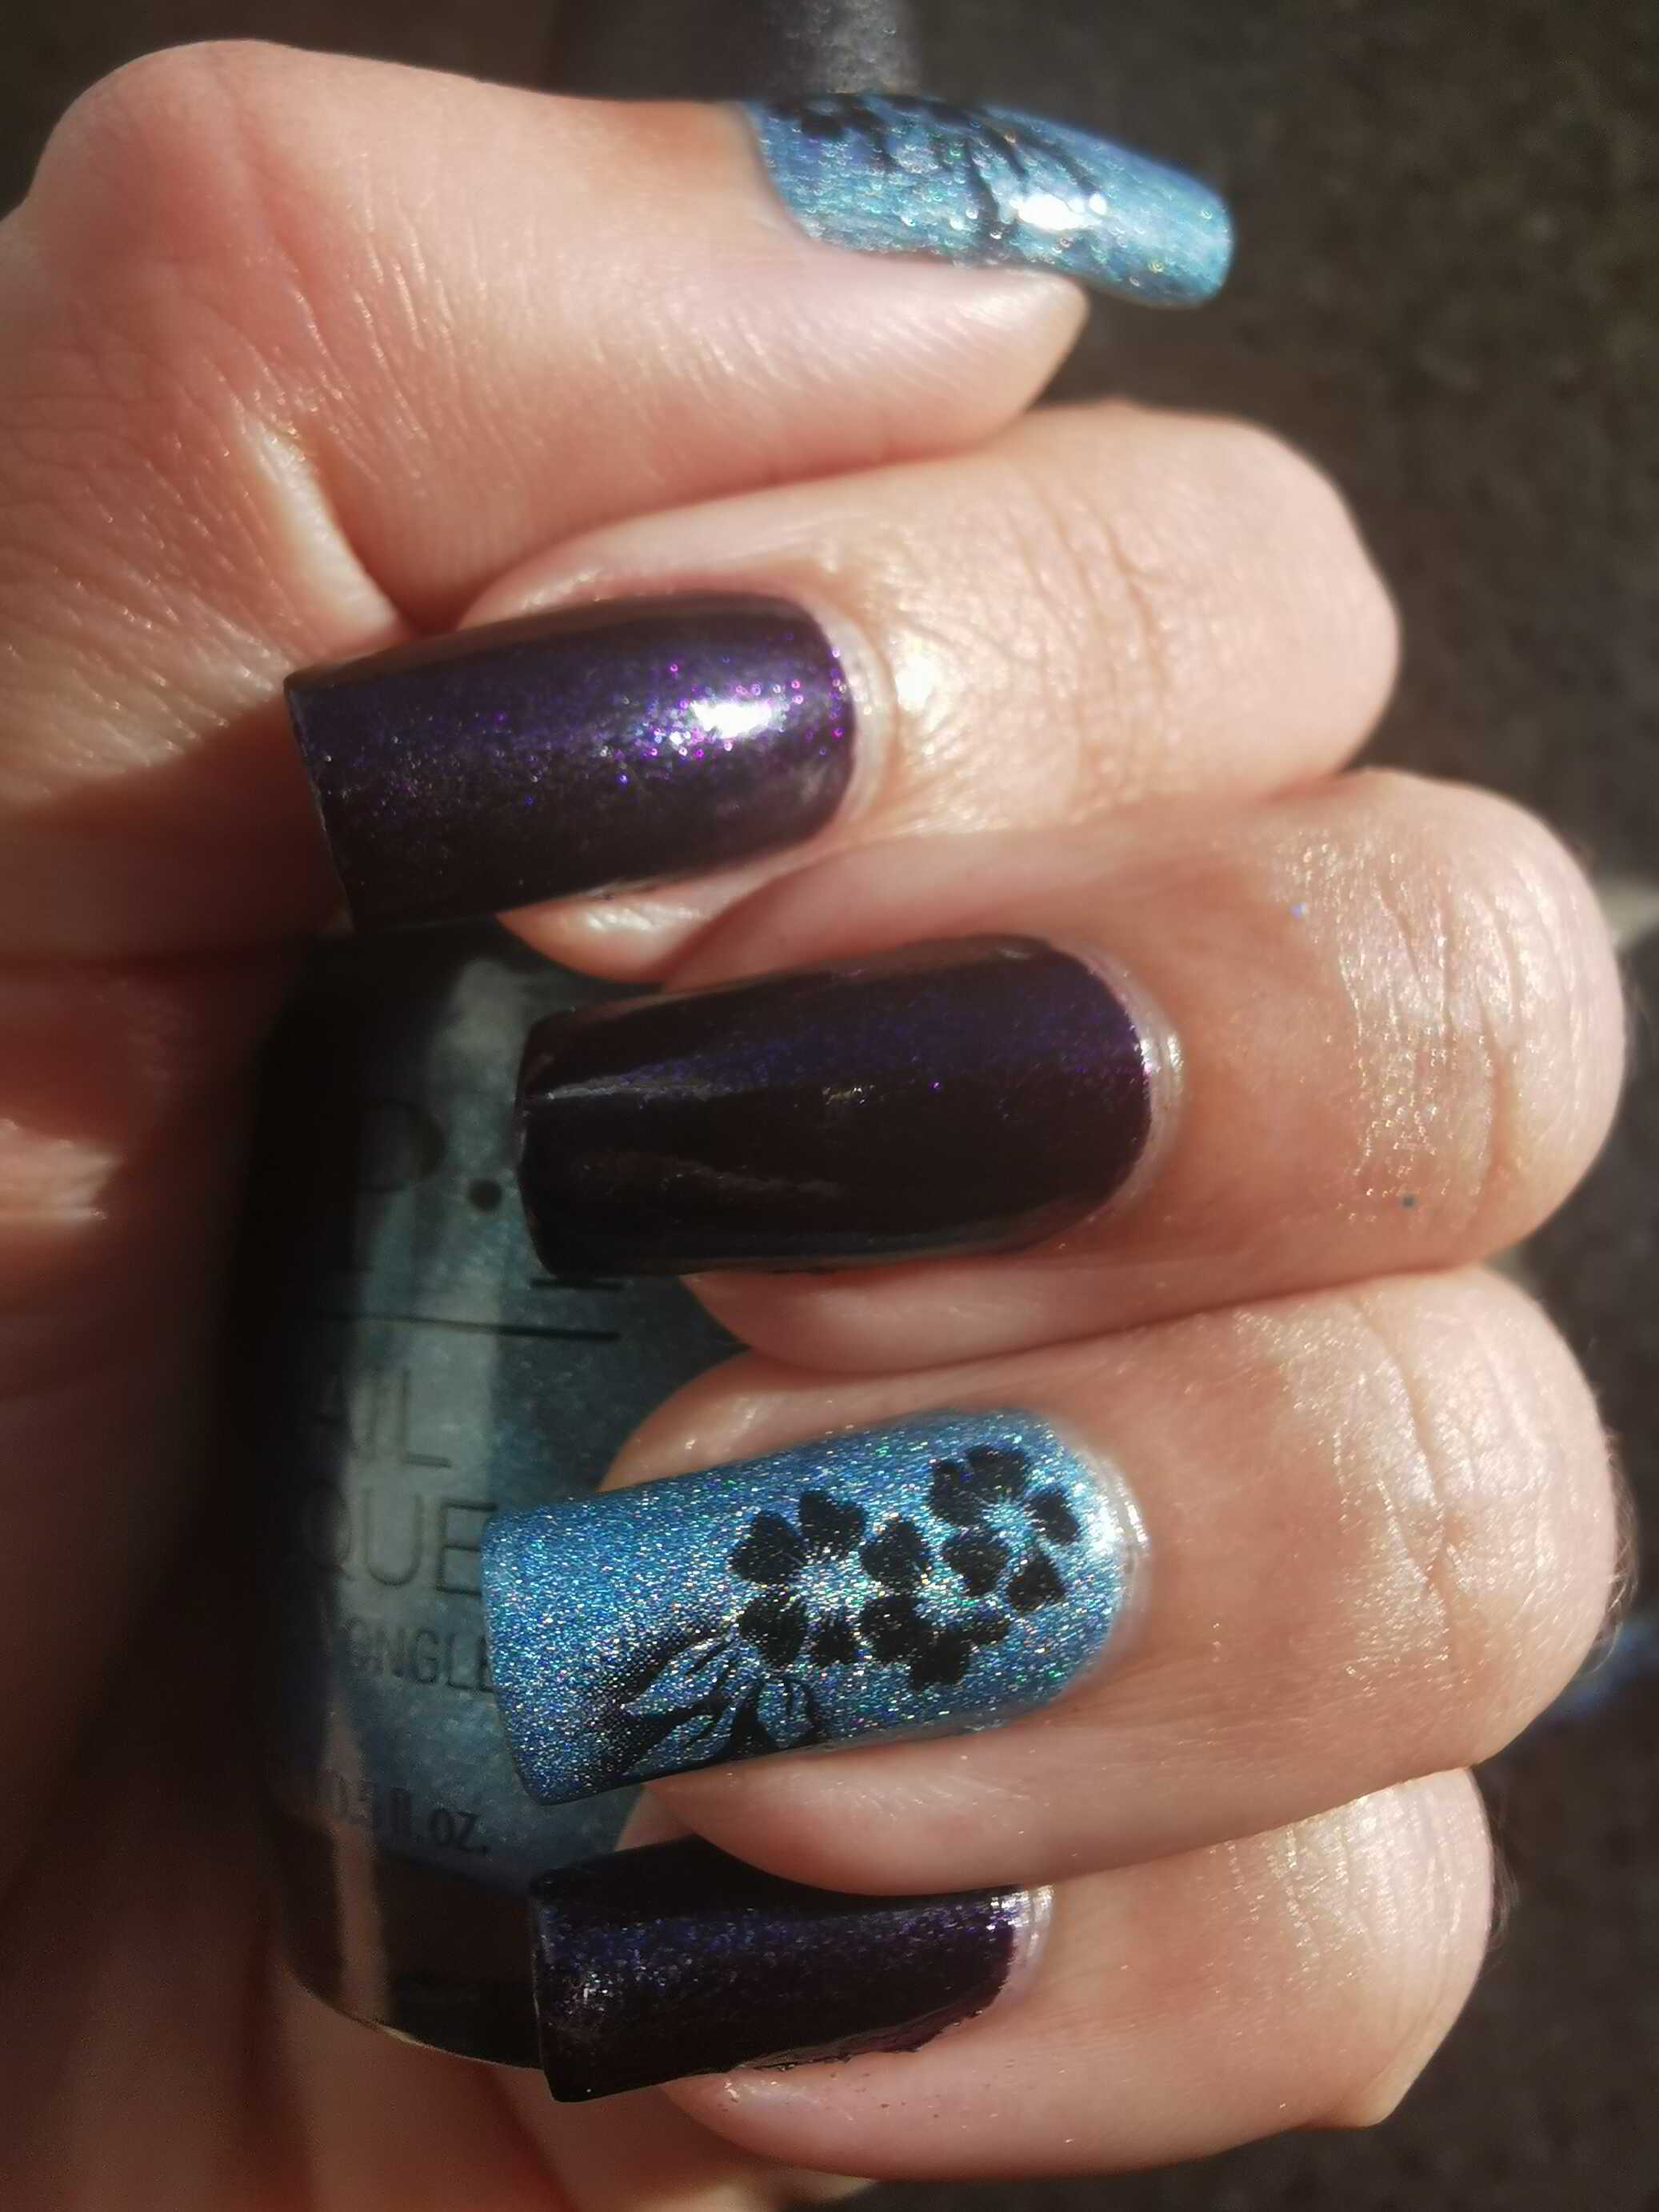 Nail polish manicure of shade OPI Angels Flight to Starry Nights, OPI Abstract After Dark,piCture pOlish Revolution Glitter Base + Foil Top Coat,Seche Vive